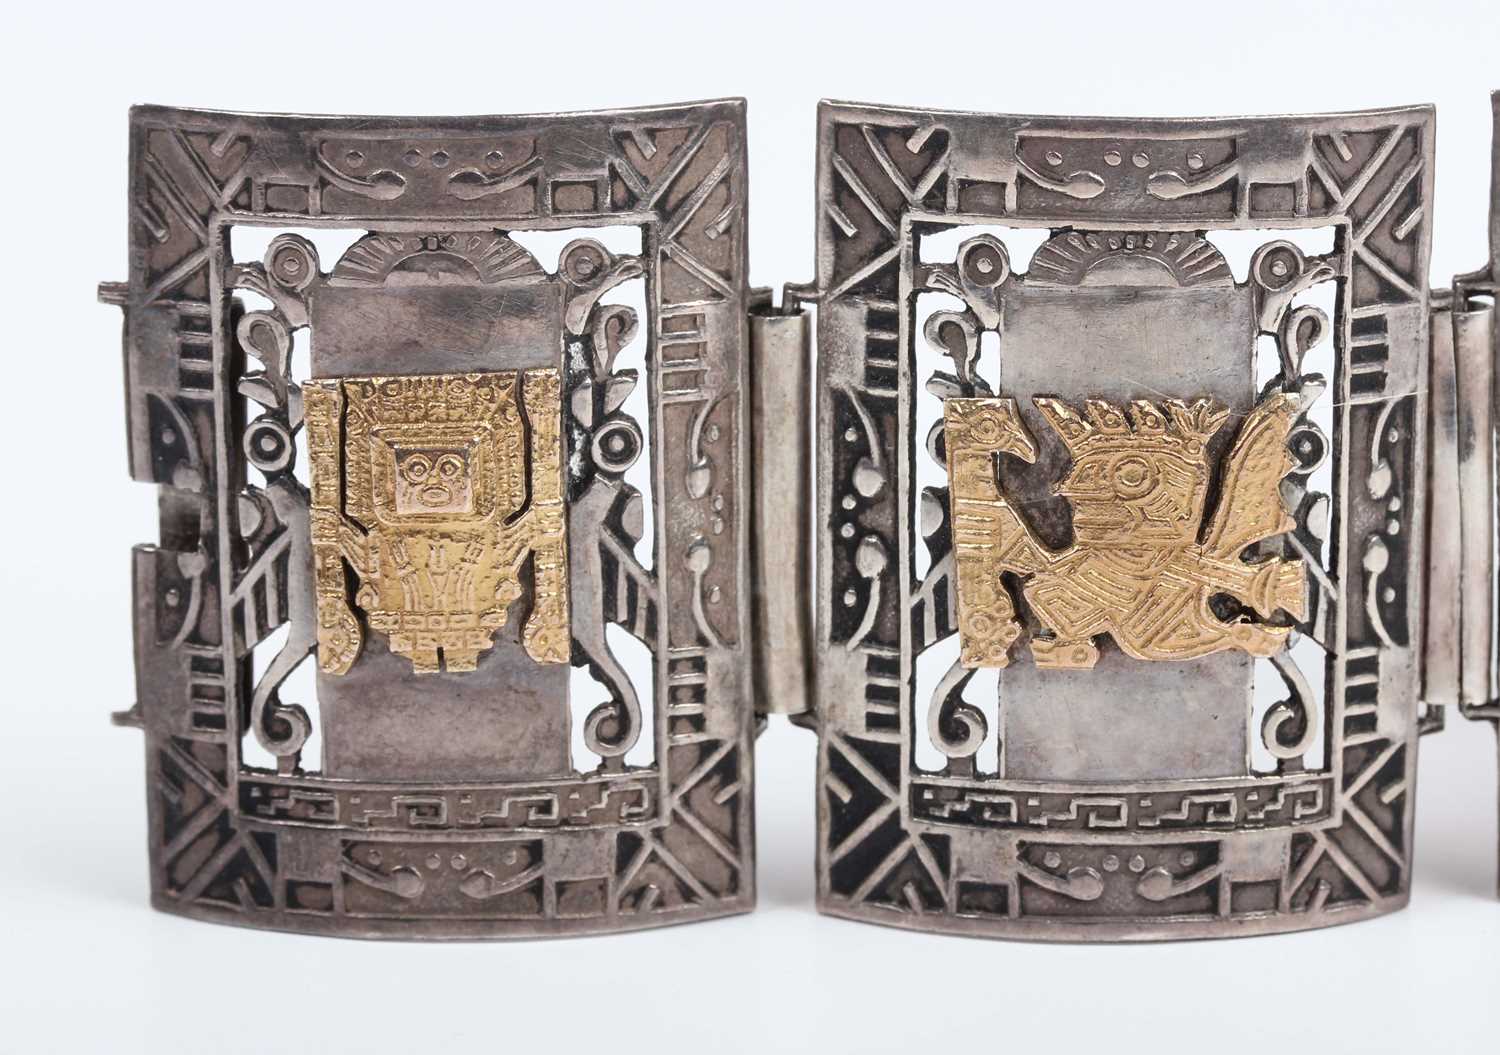 A Peruvian silver and gold panel link bracelet, each curved rectangular link decorated with a - Image 2 of 5